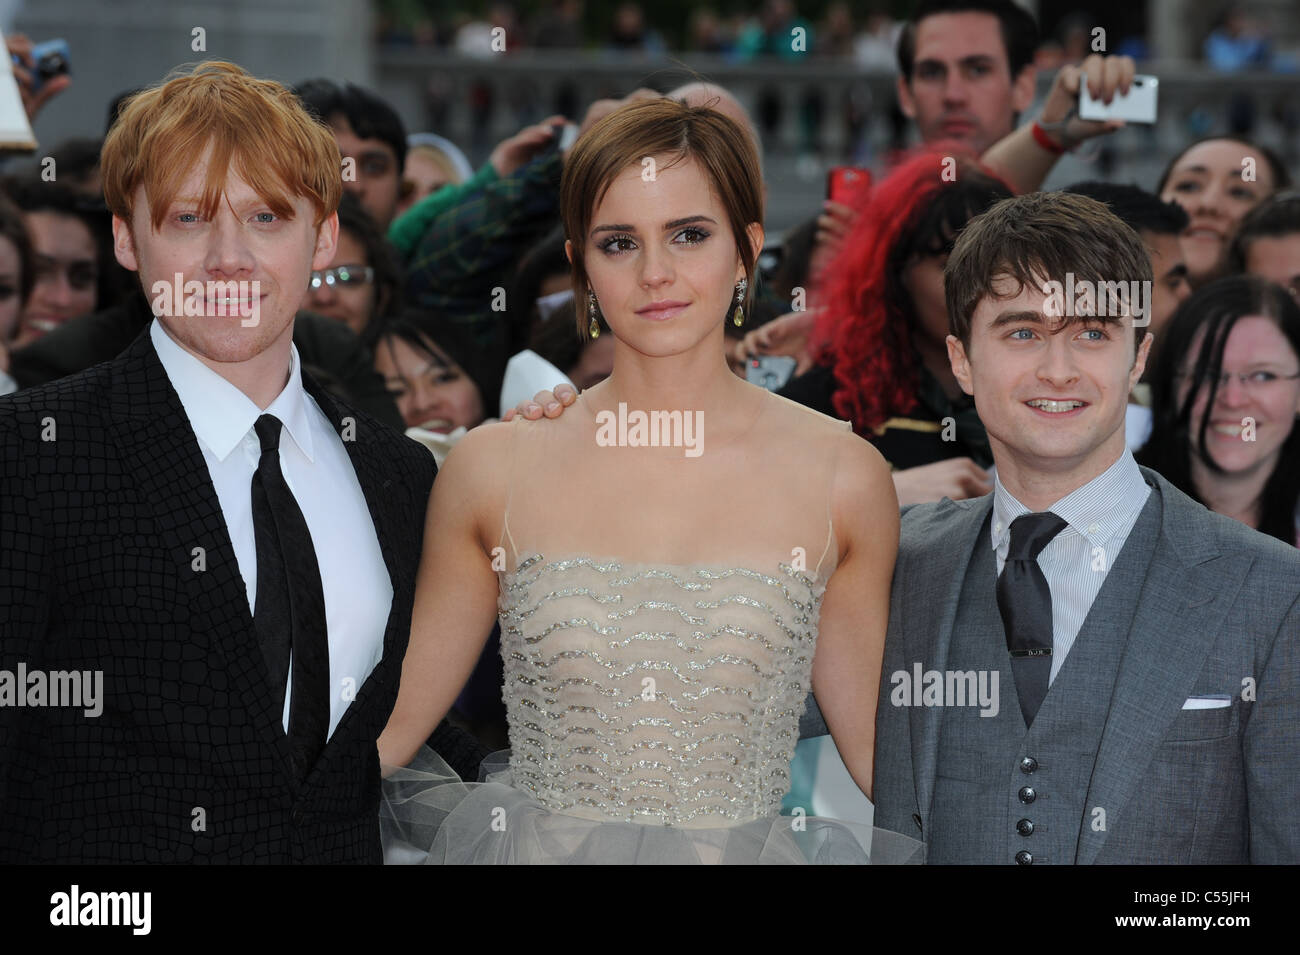 RUPERT GRINT EMMA WATSON & DANIEL RADCLIFFE HARRY POTTER AND THE DEATHLY HALLOWS - PART 2 - WORLD PREMIERE TRAFALGAR SQUARE LO Stock Photo